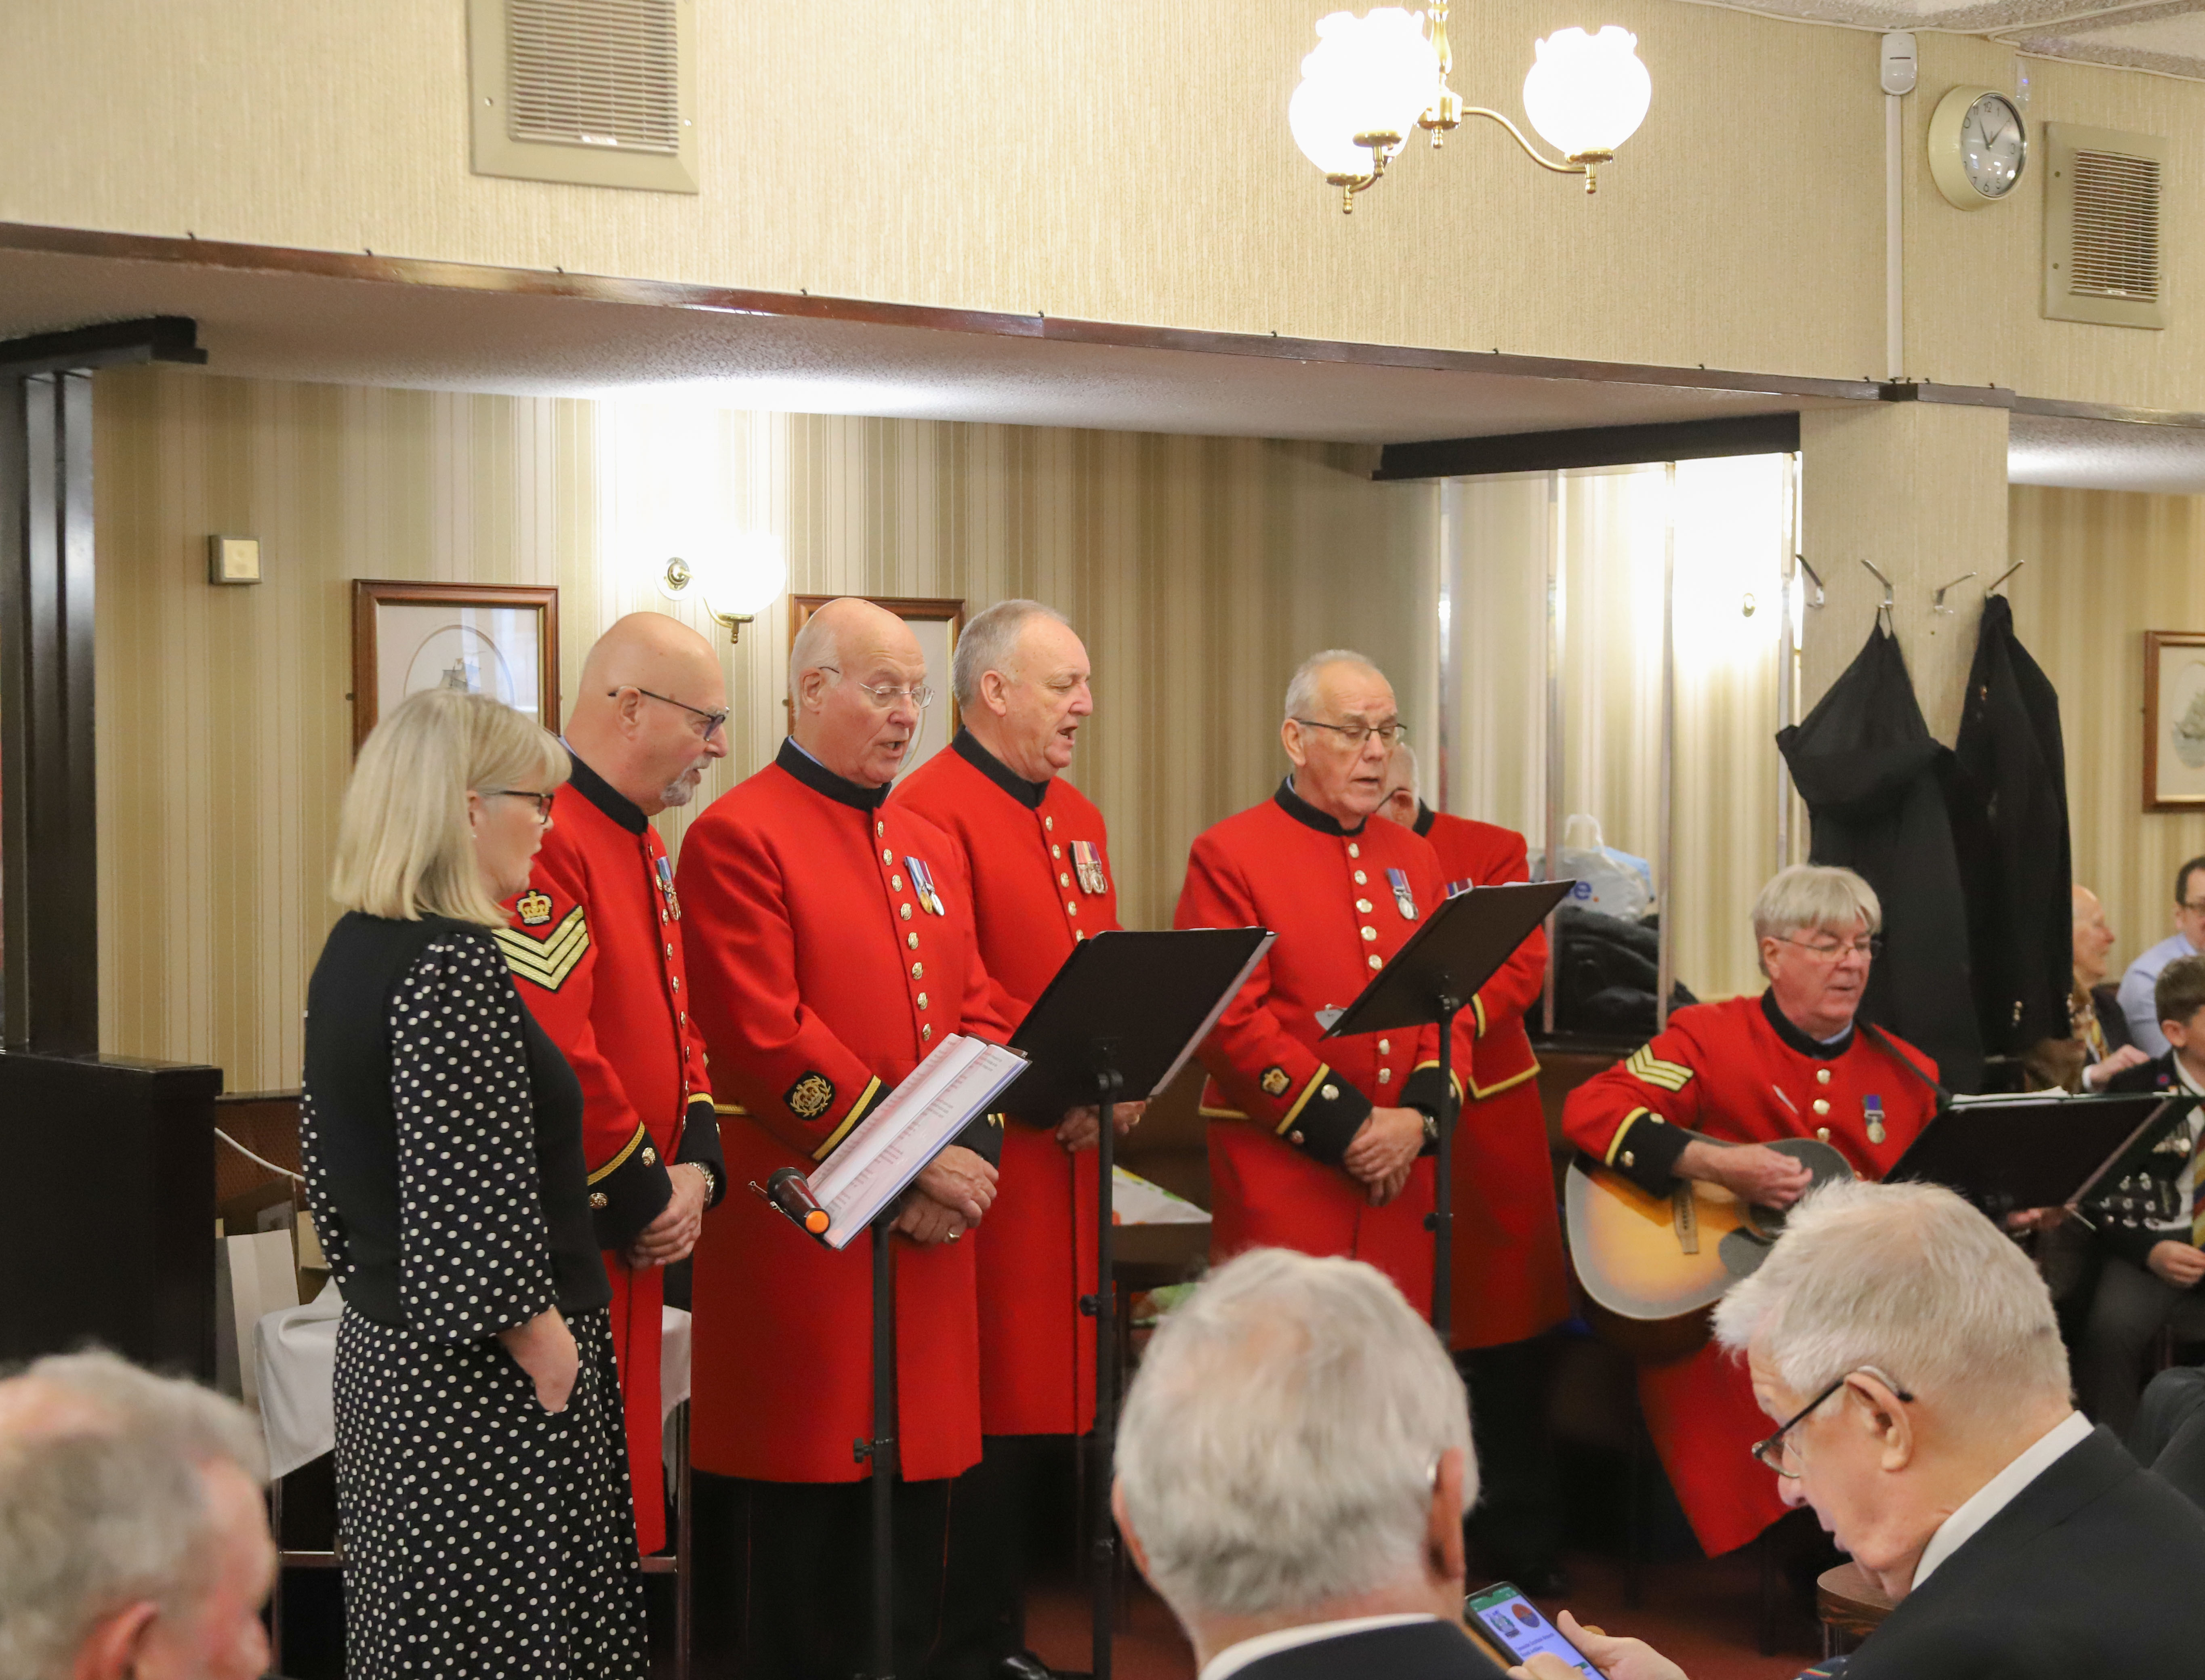 Group of Chelsea Pensioners in scarlet uniform stood on a small stage singing